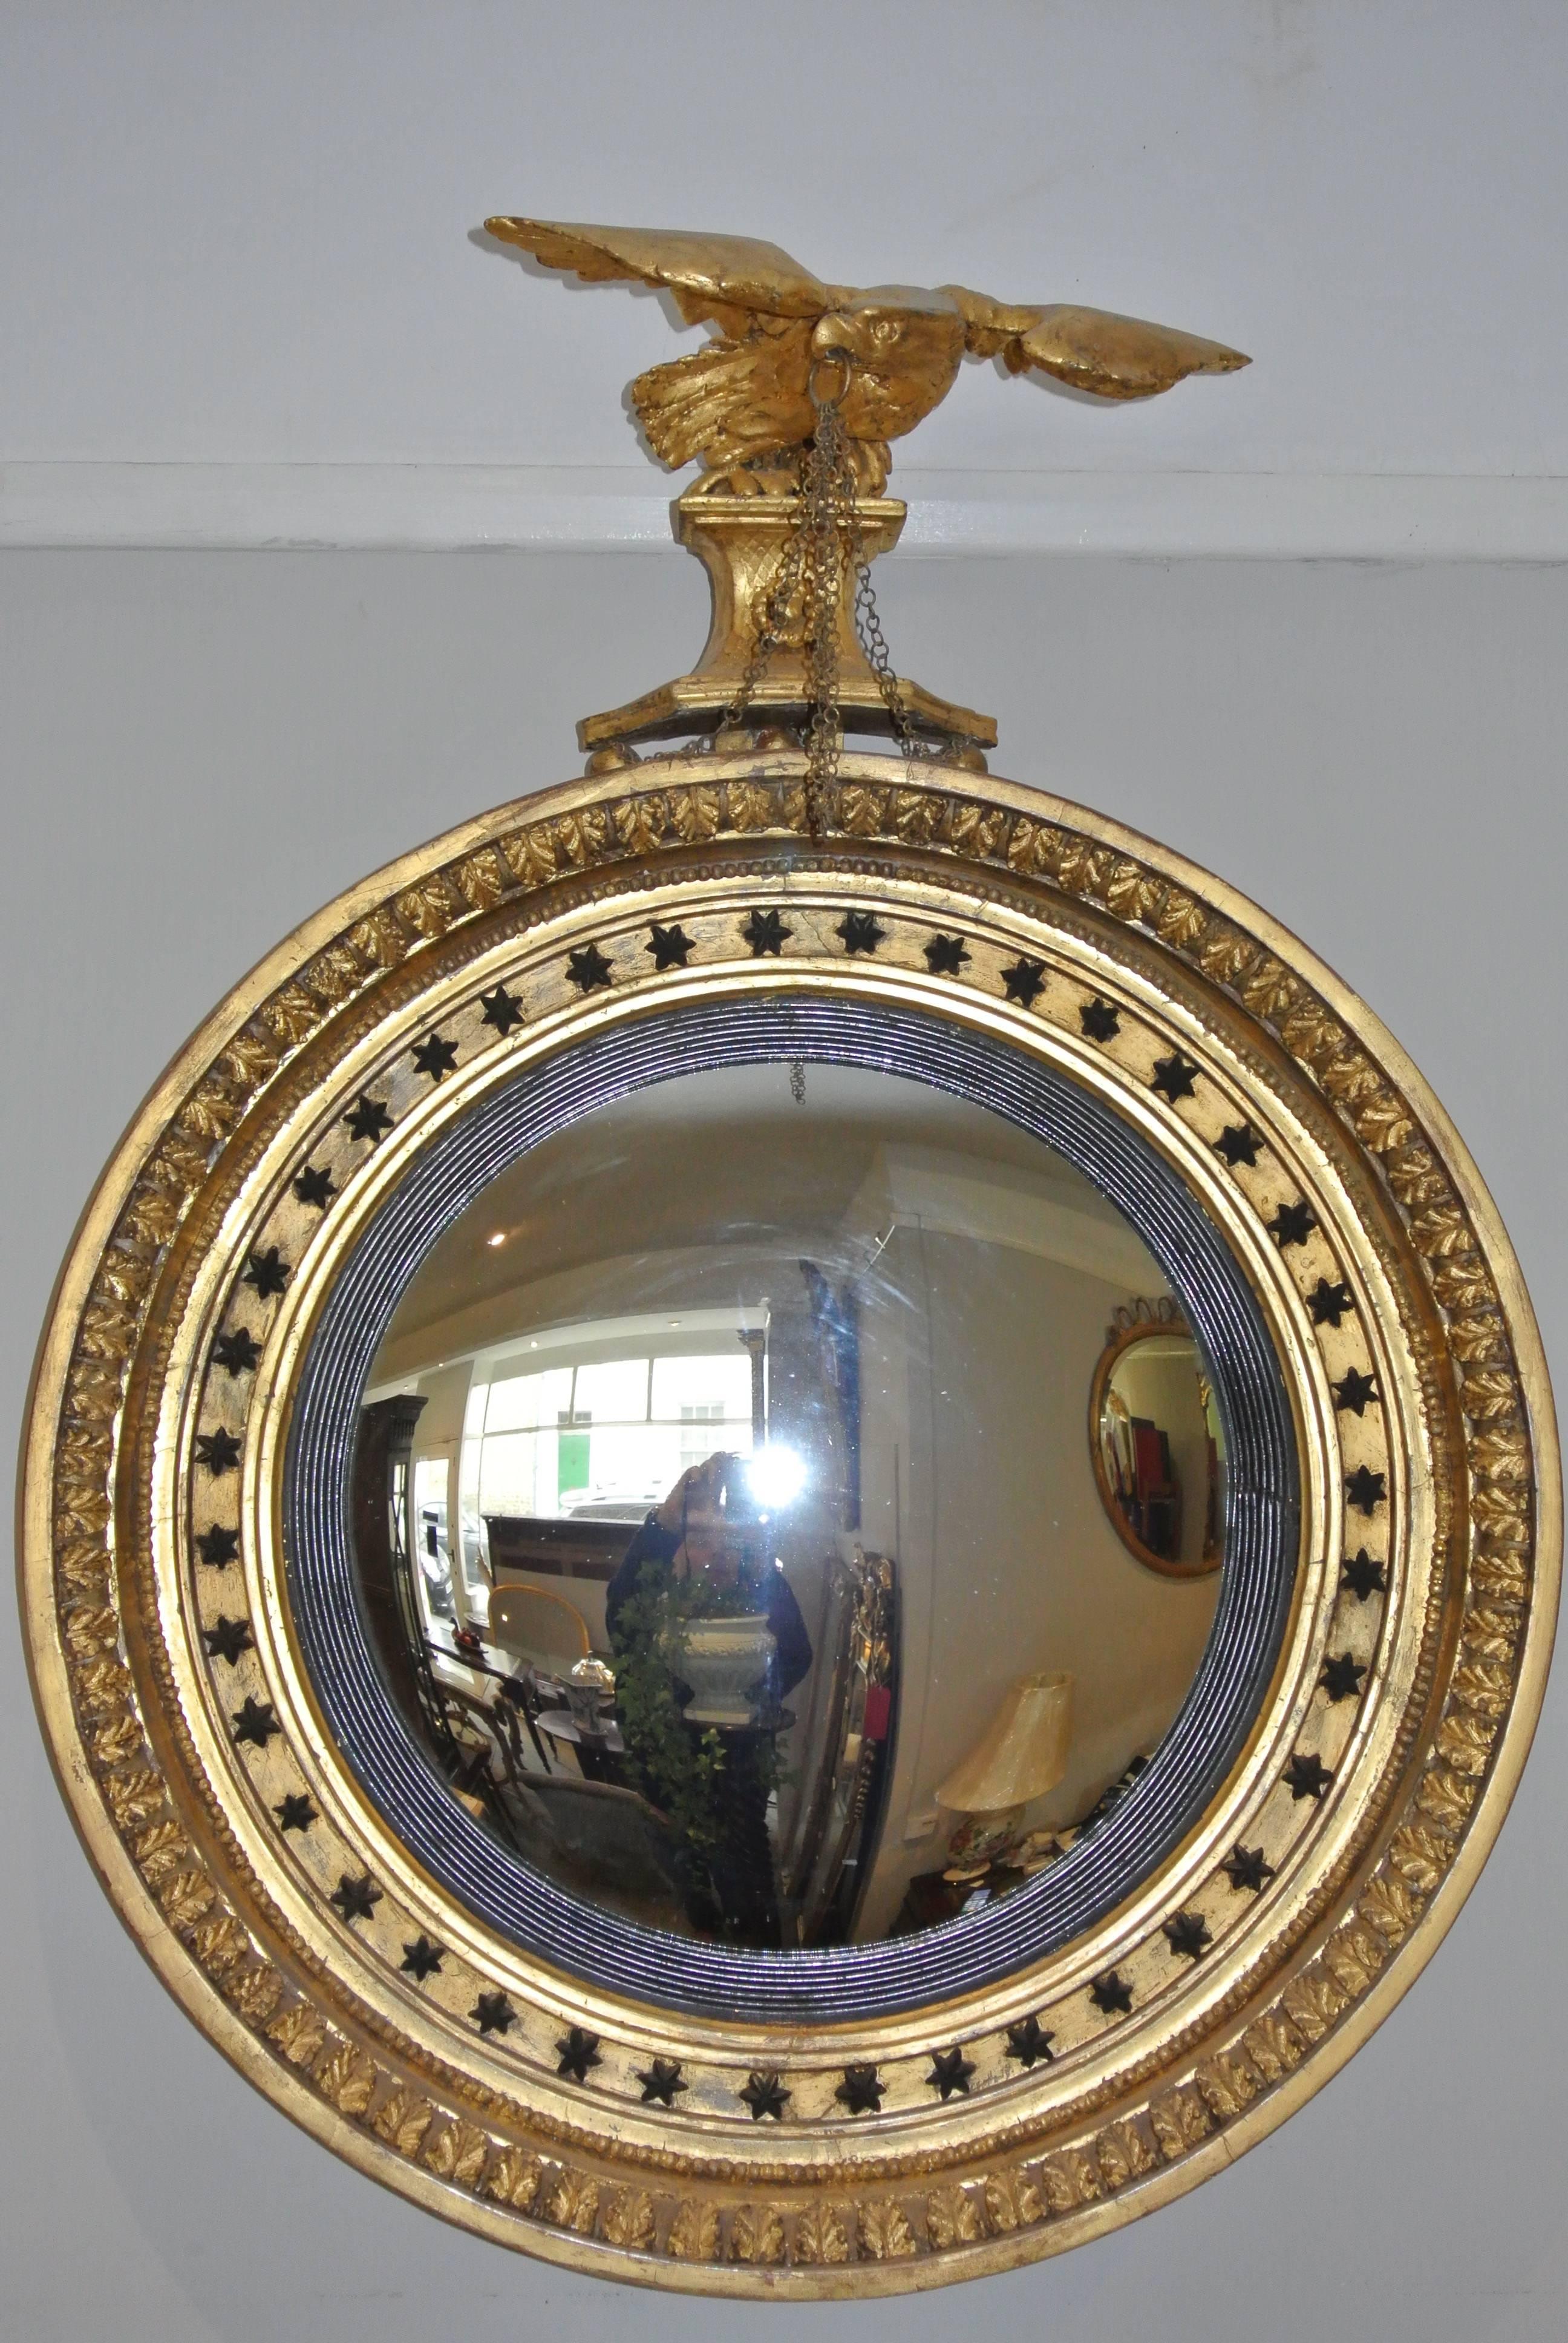 A fine quality Regency giltwood mirror of large proportions surmounted by a carved eagle and decorated with ebonised stars and acanthus leaves.